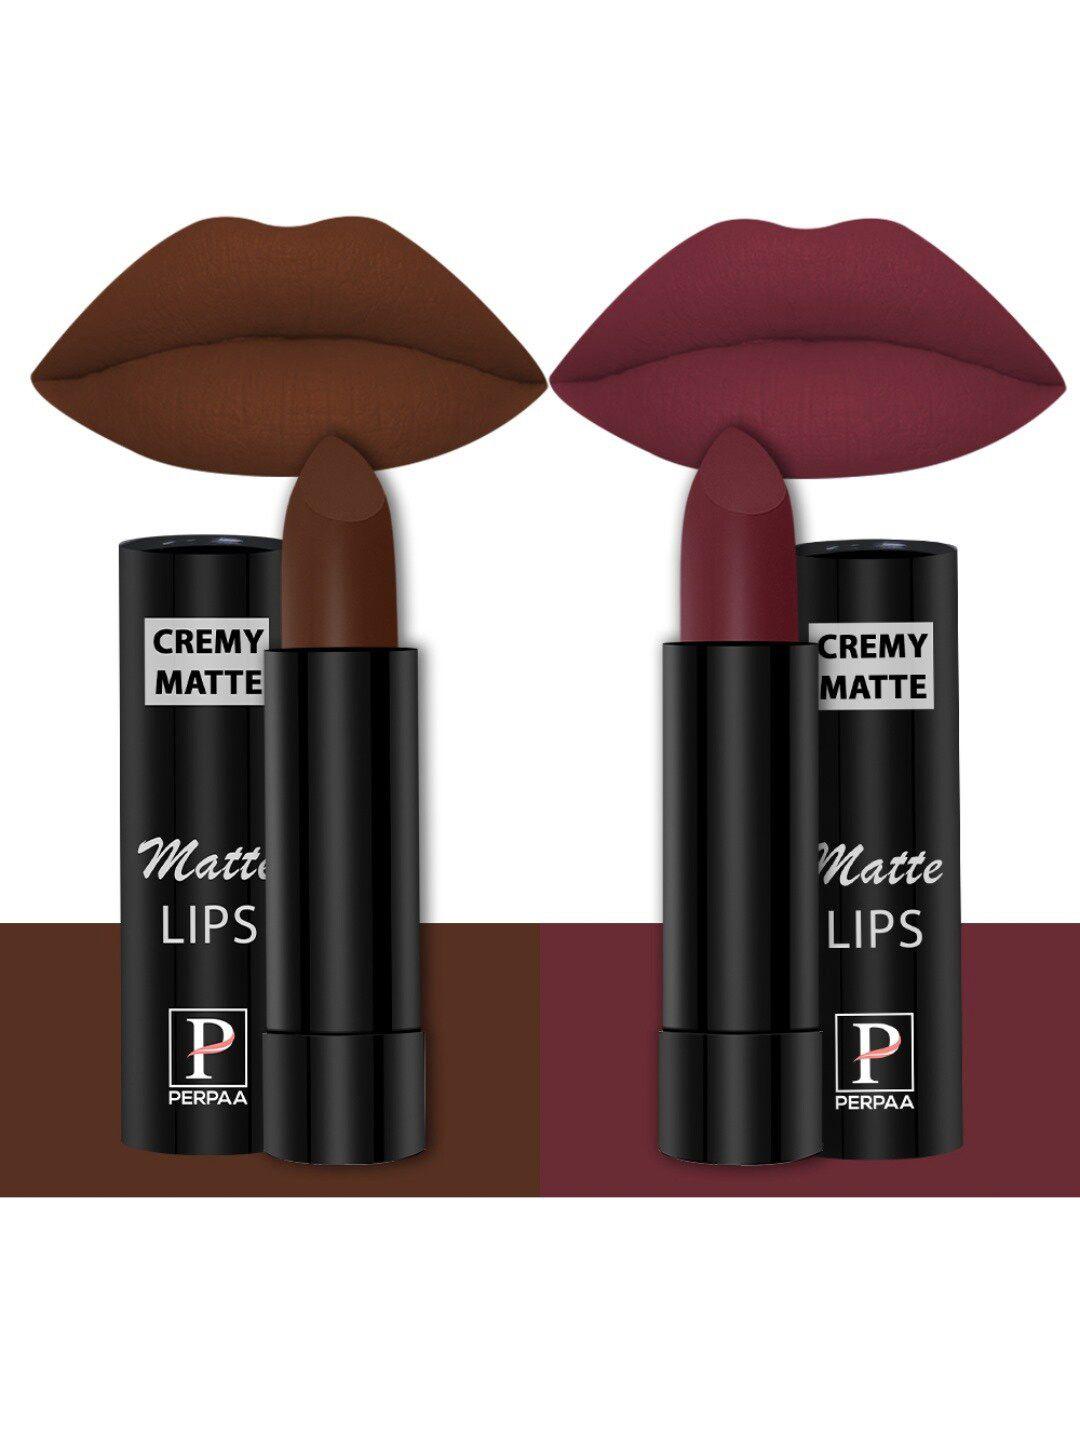 perpaa set of 2 creamy matte bullet lipstick - 3.5g each - cocoa brown 67-cherry maroon 95